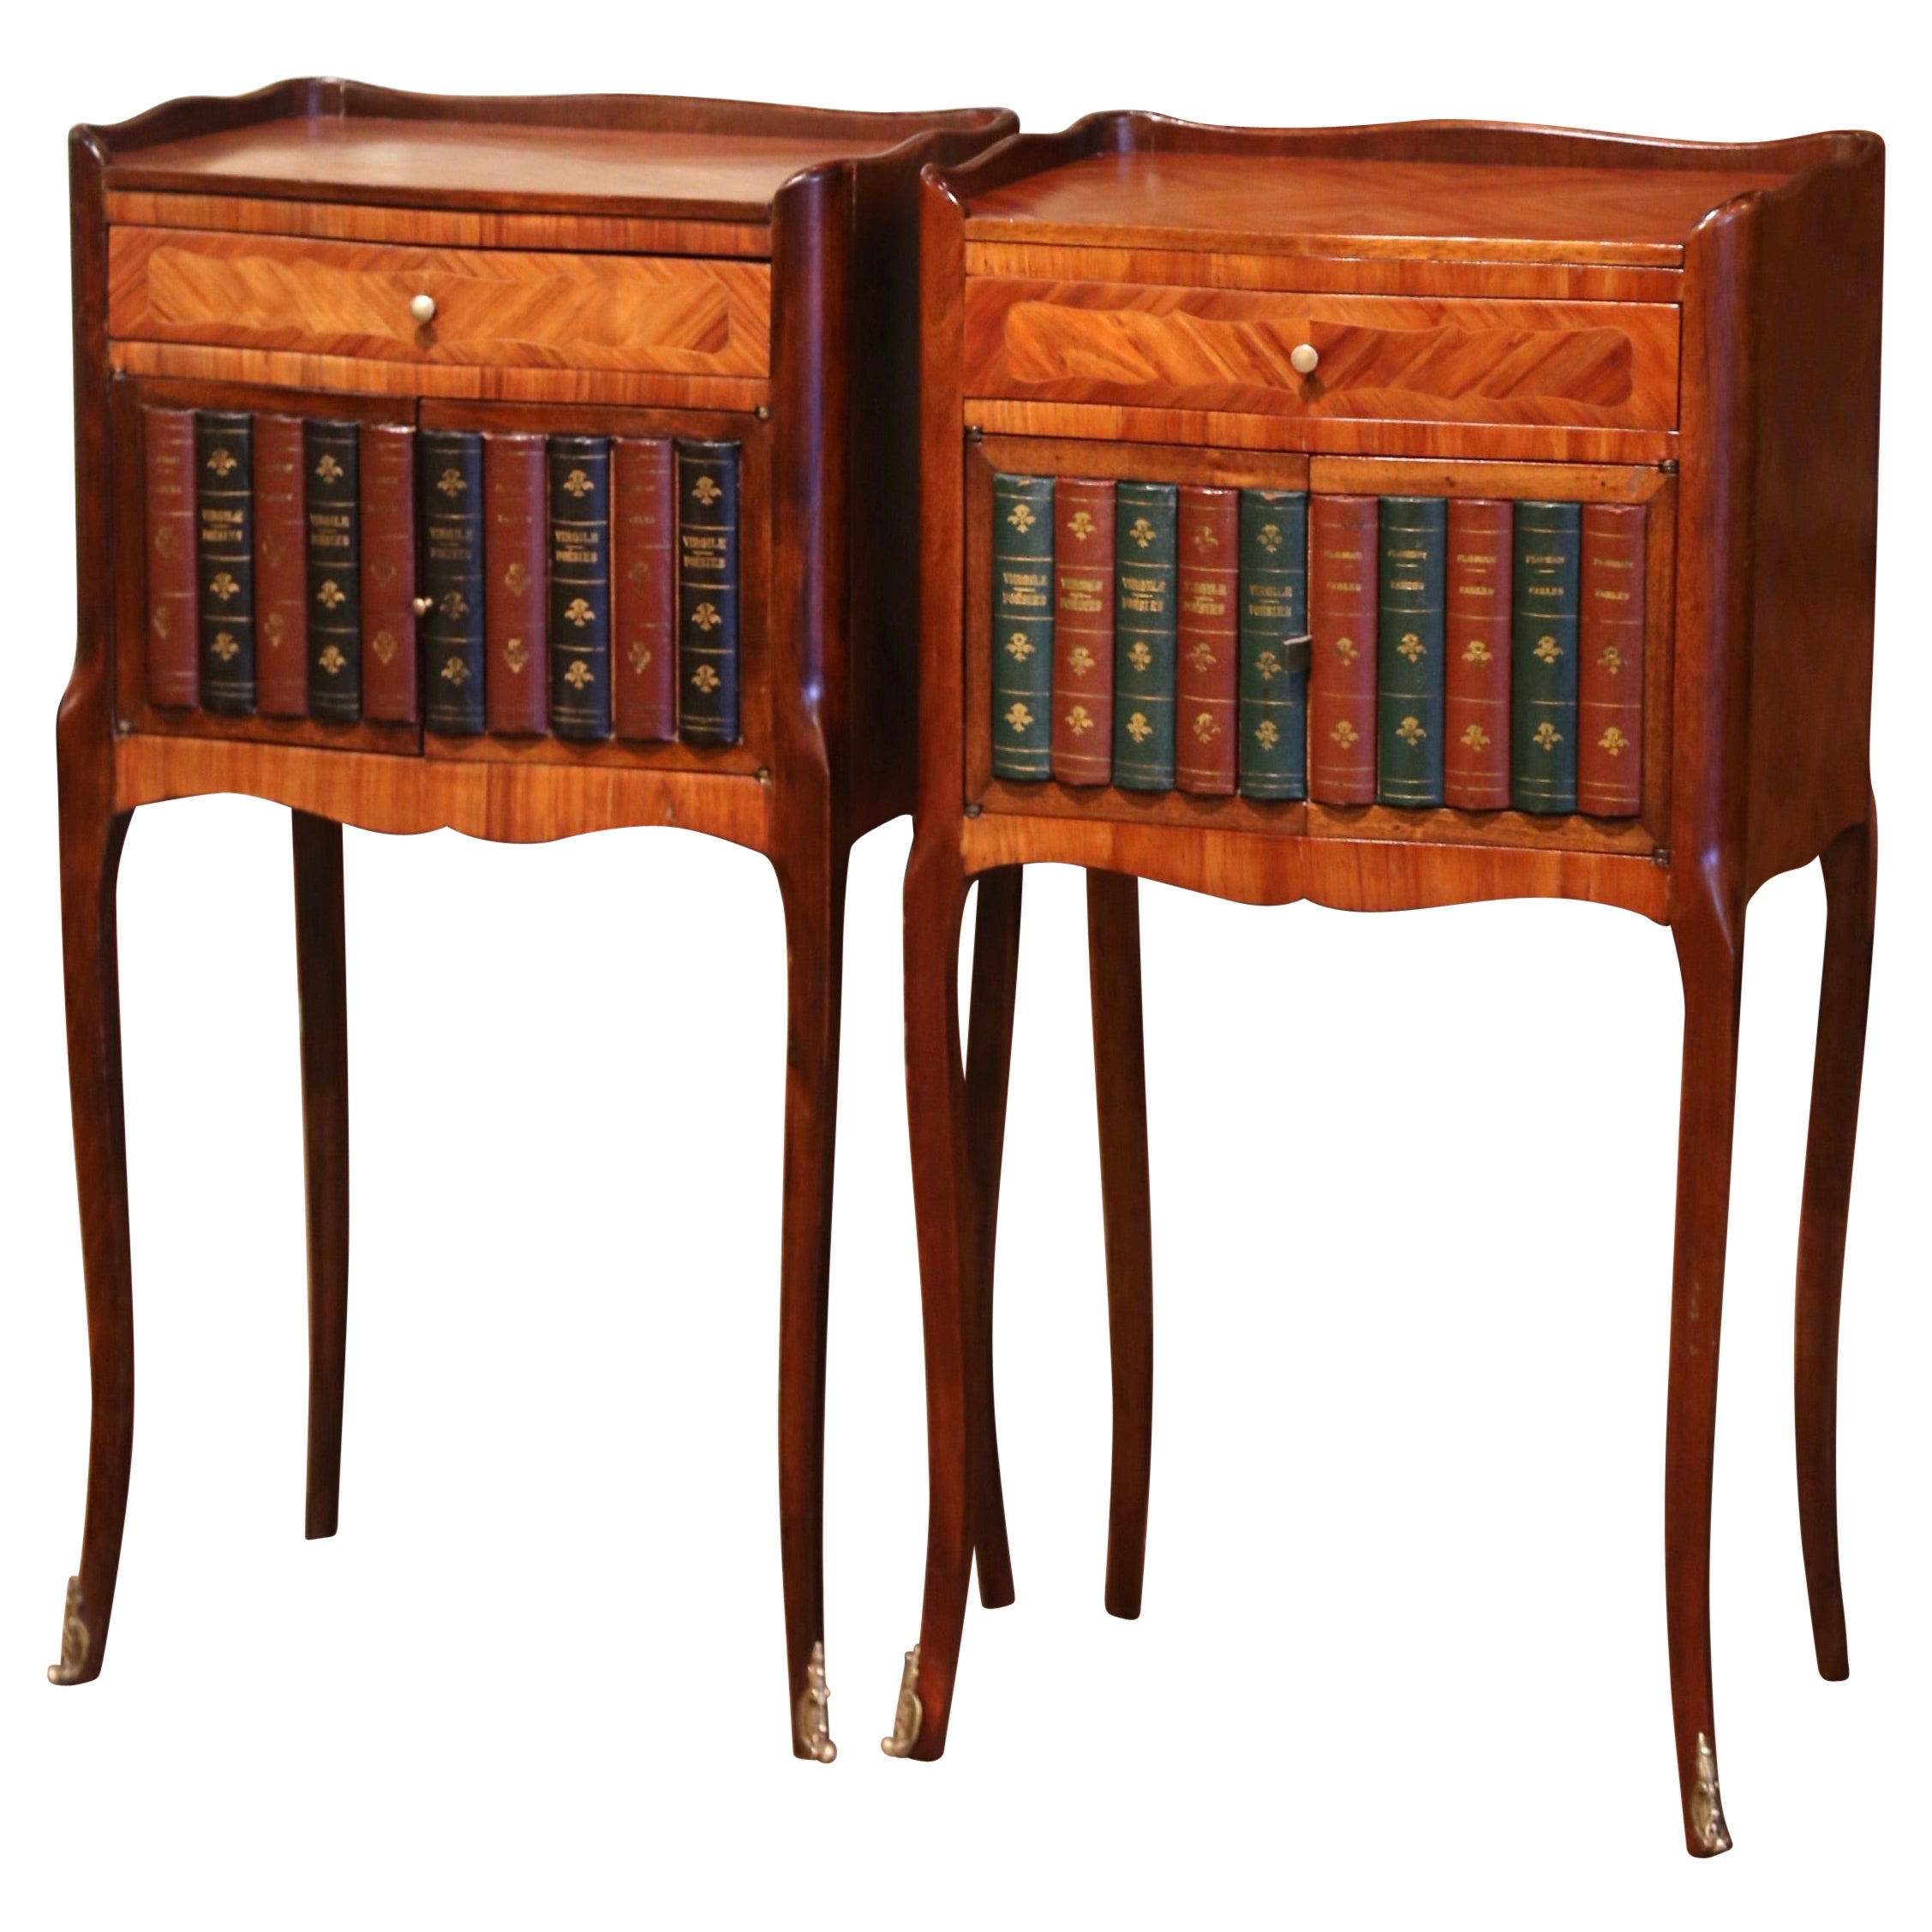 Pair of 19th Century French Walnut Nightstands with Leather Book Spine Doors For Sale